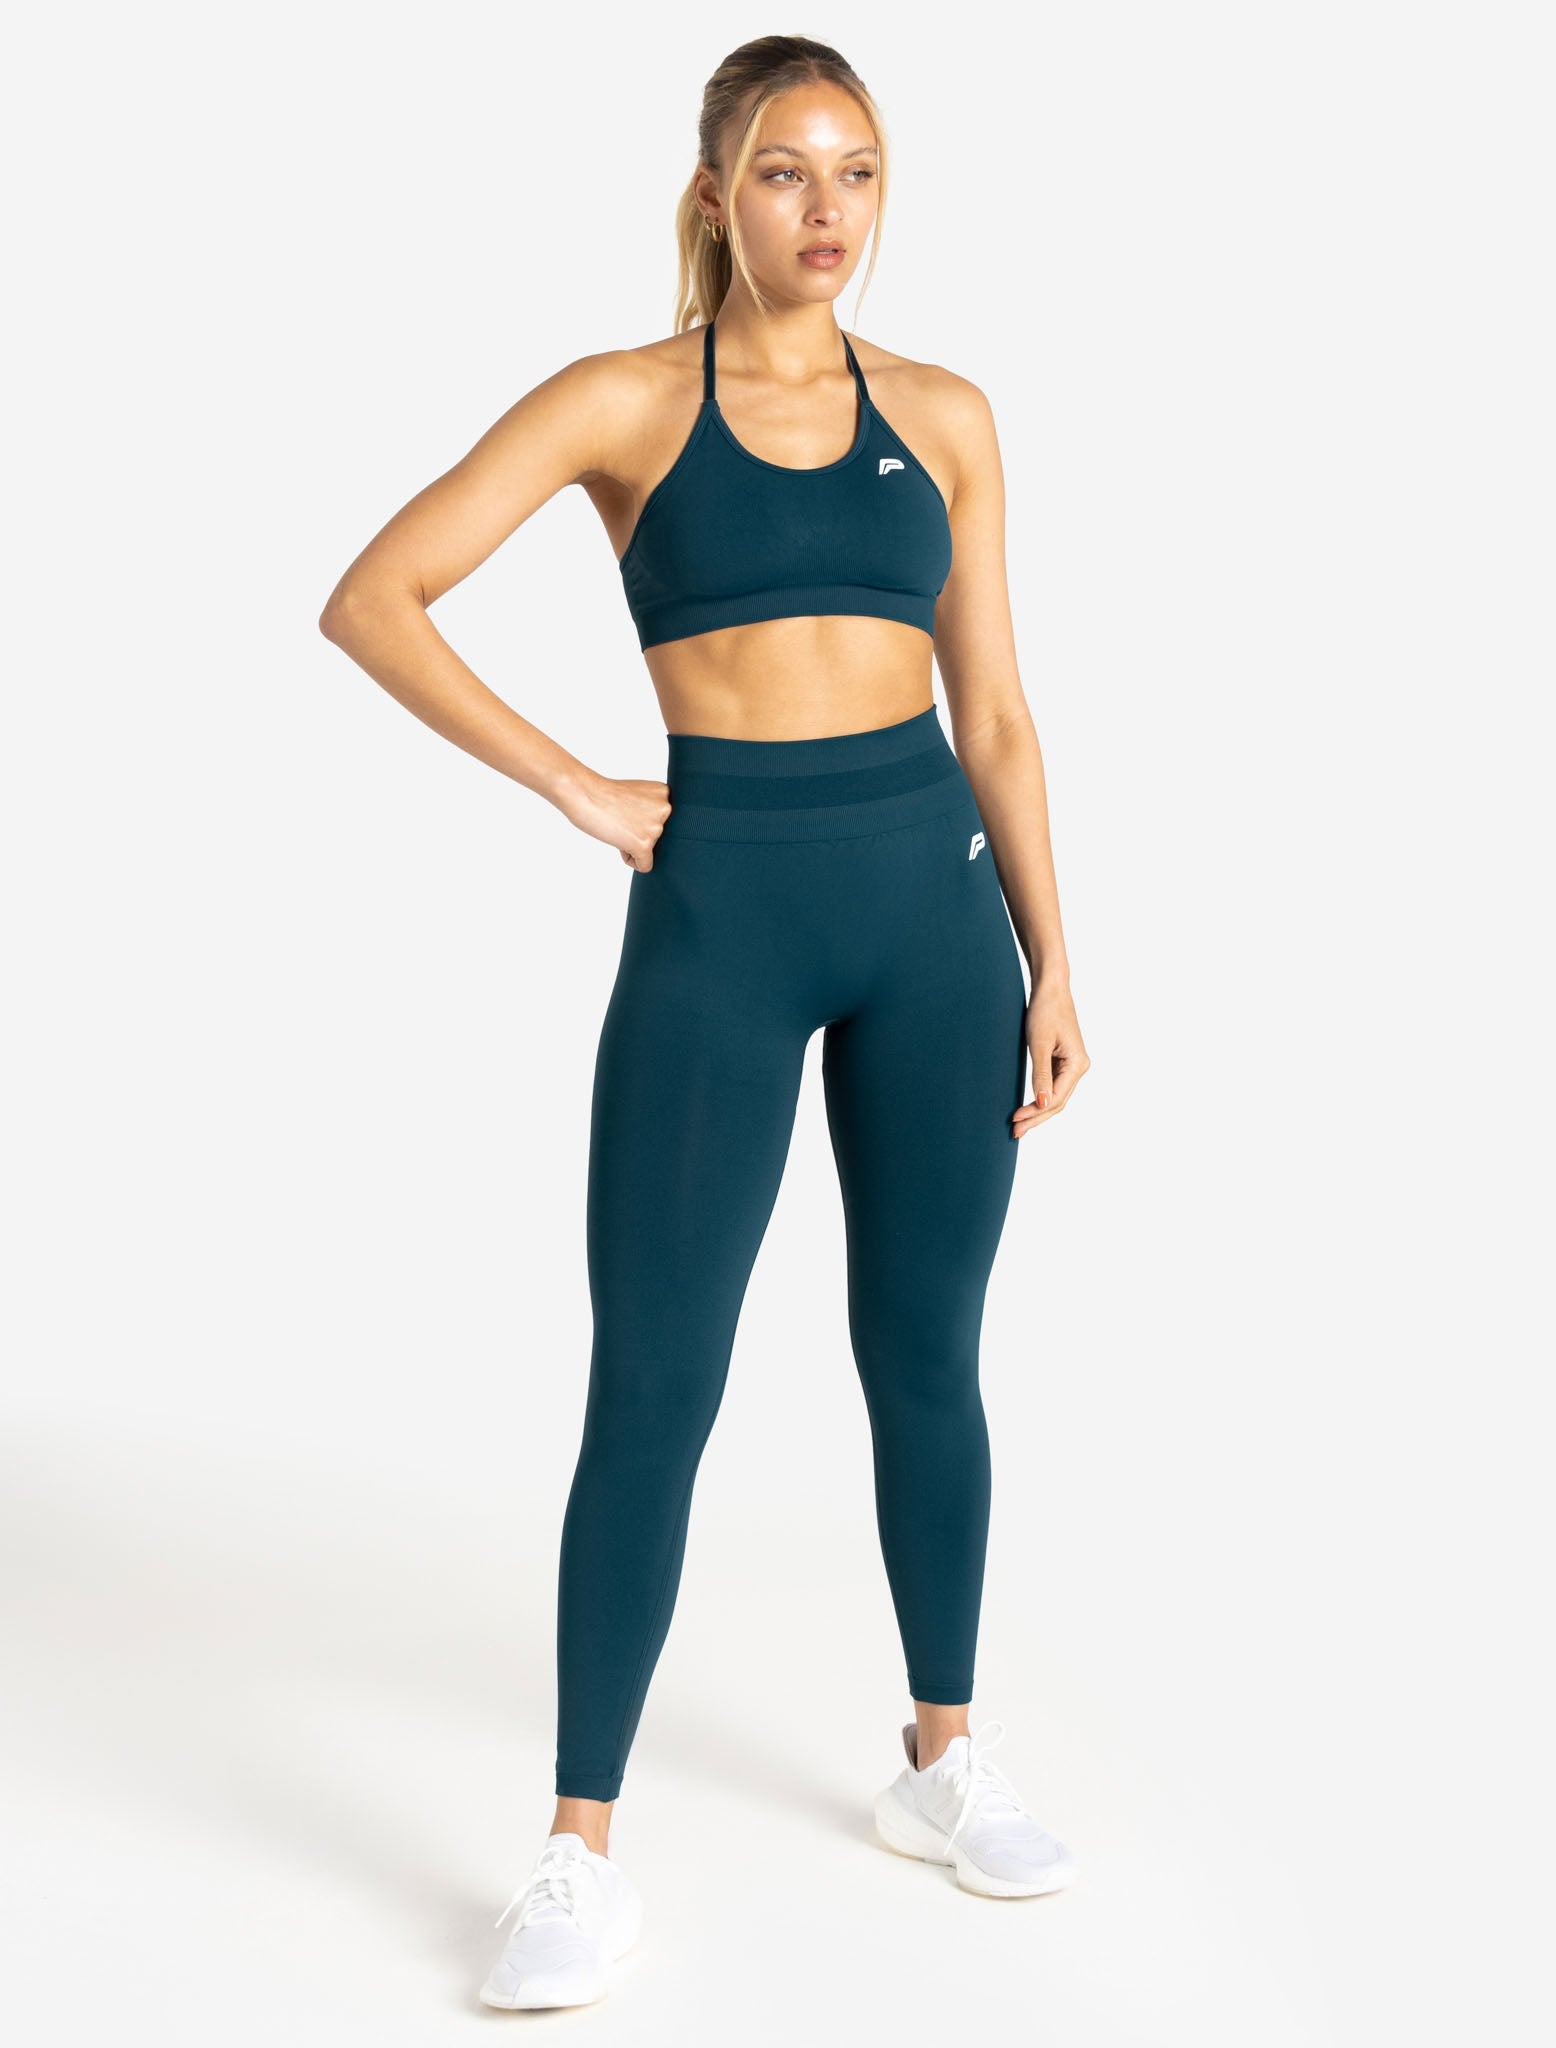 Woman in Teal Sports Bra and Brown Leggings · Free Stock Photo